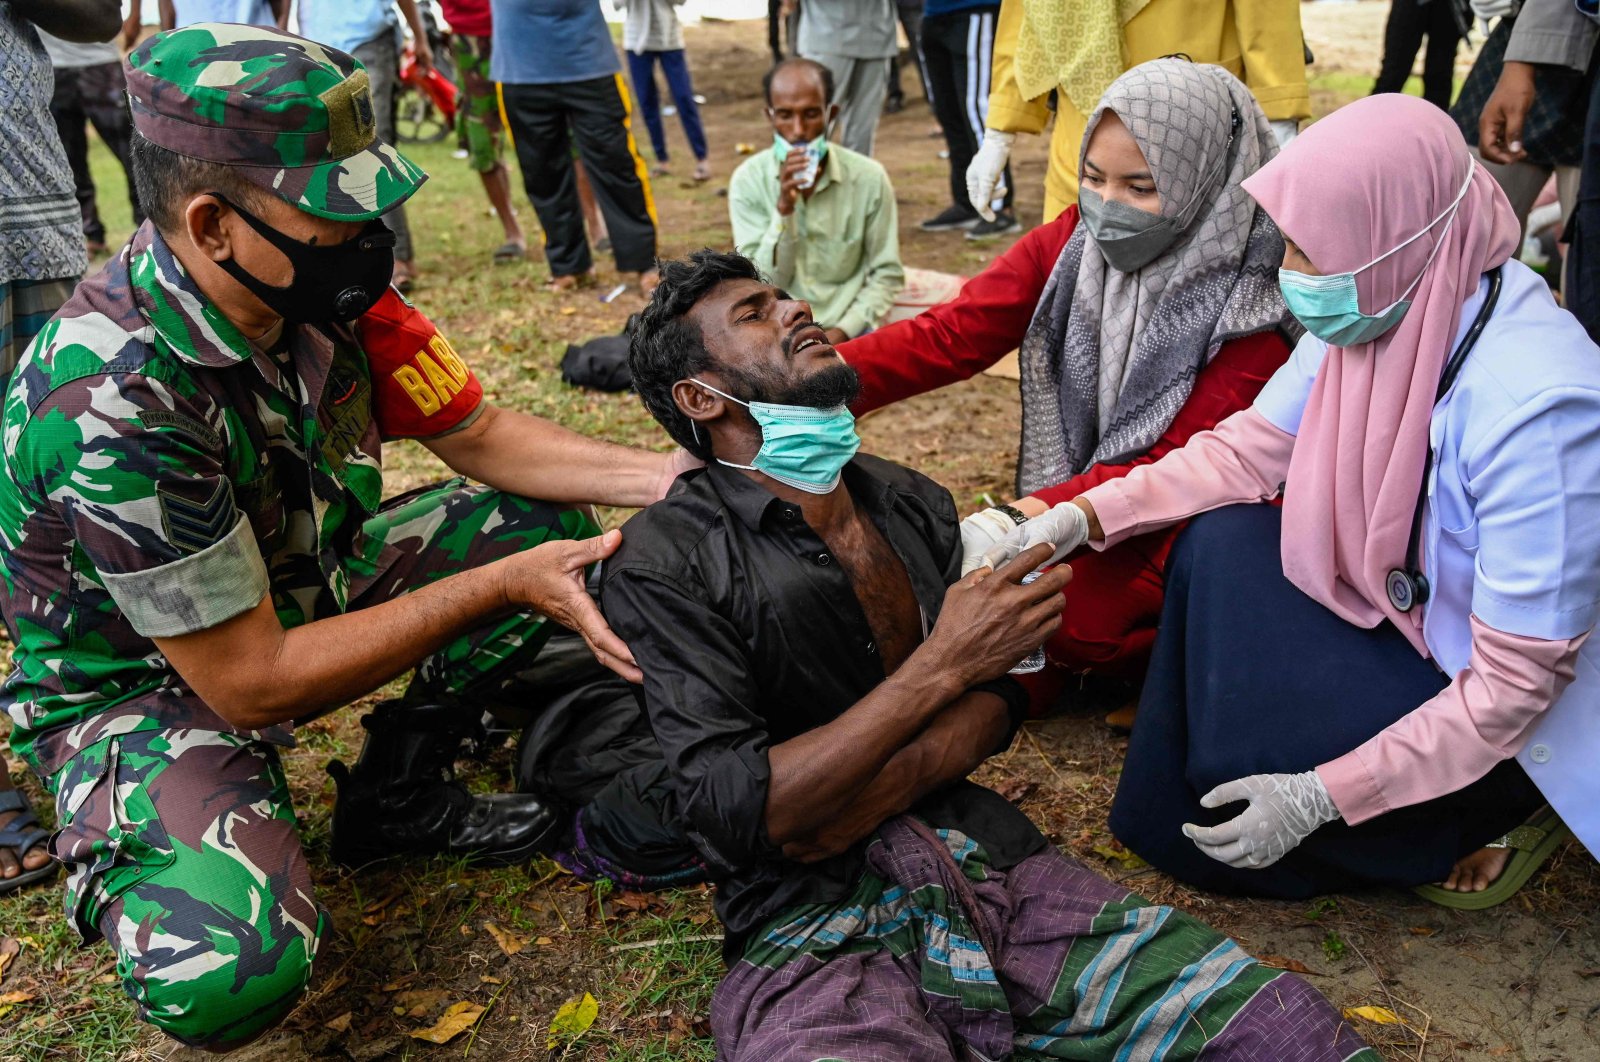 Health workers check a Rohingya refugee who was feeling sick after his arrival by boat in Krueng Raya, Indonesia, Dec. 25, 2022. (AFP Photo)